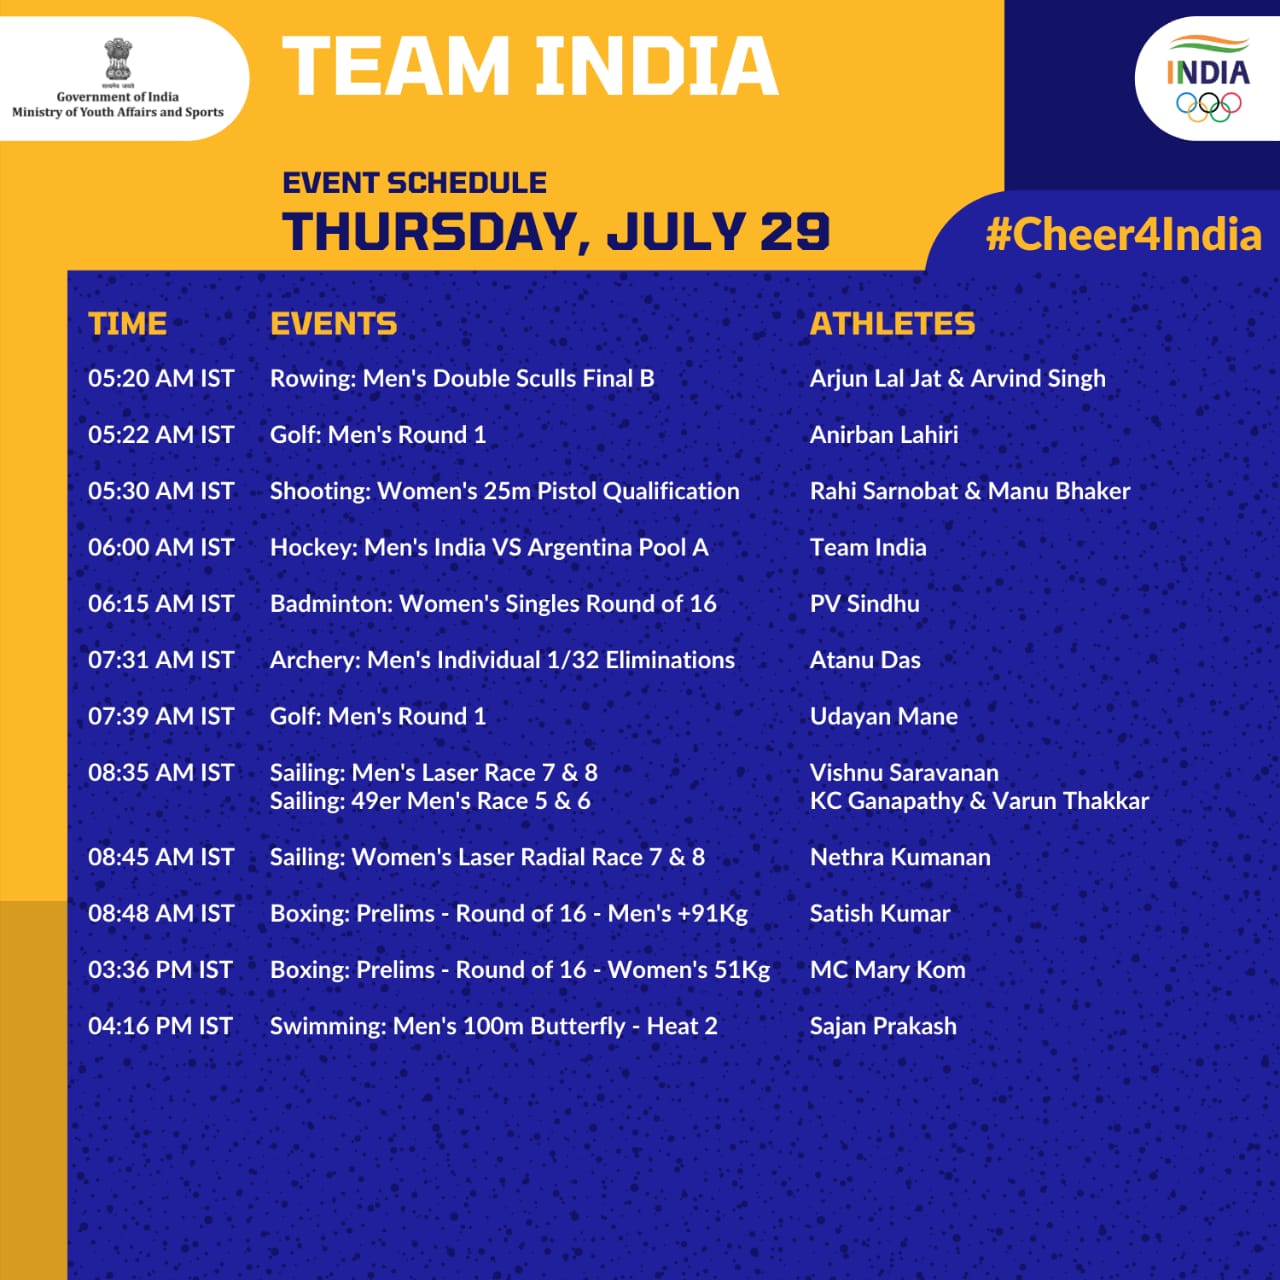 India's schedule on the seventh day of the Tokyo Olympics on Thursday. (Image credit- SAI Media).